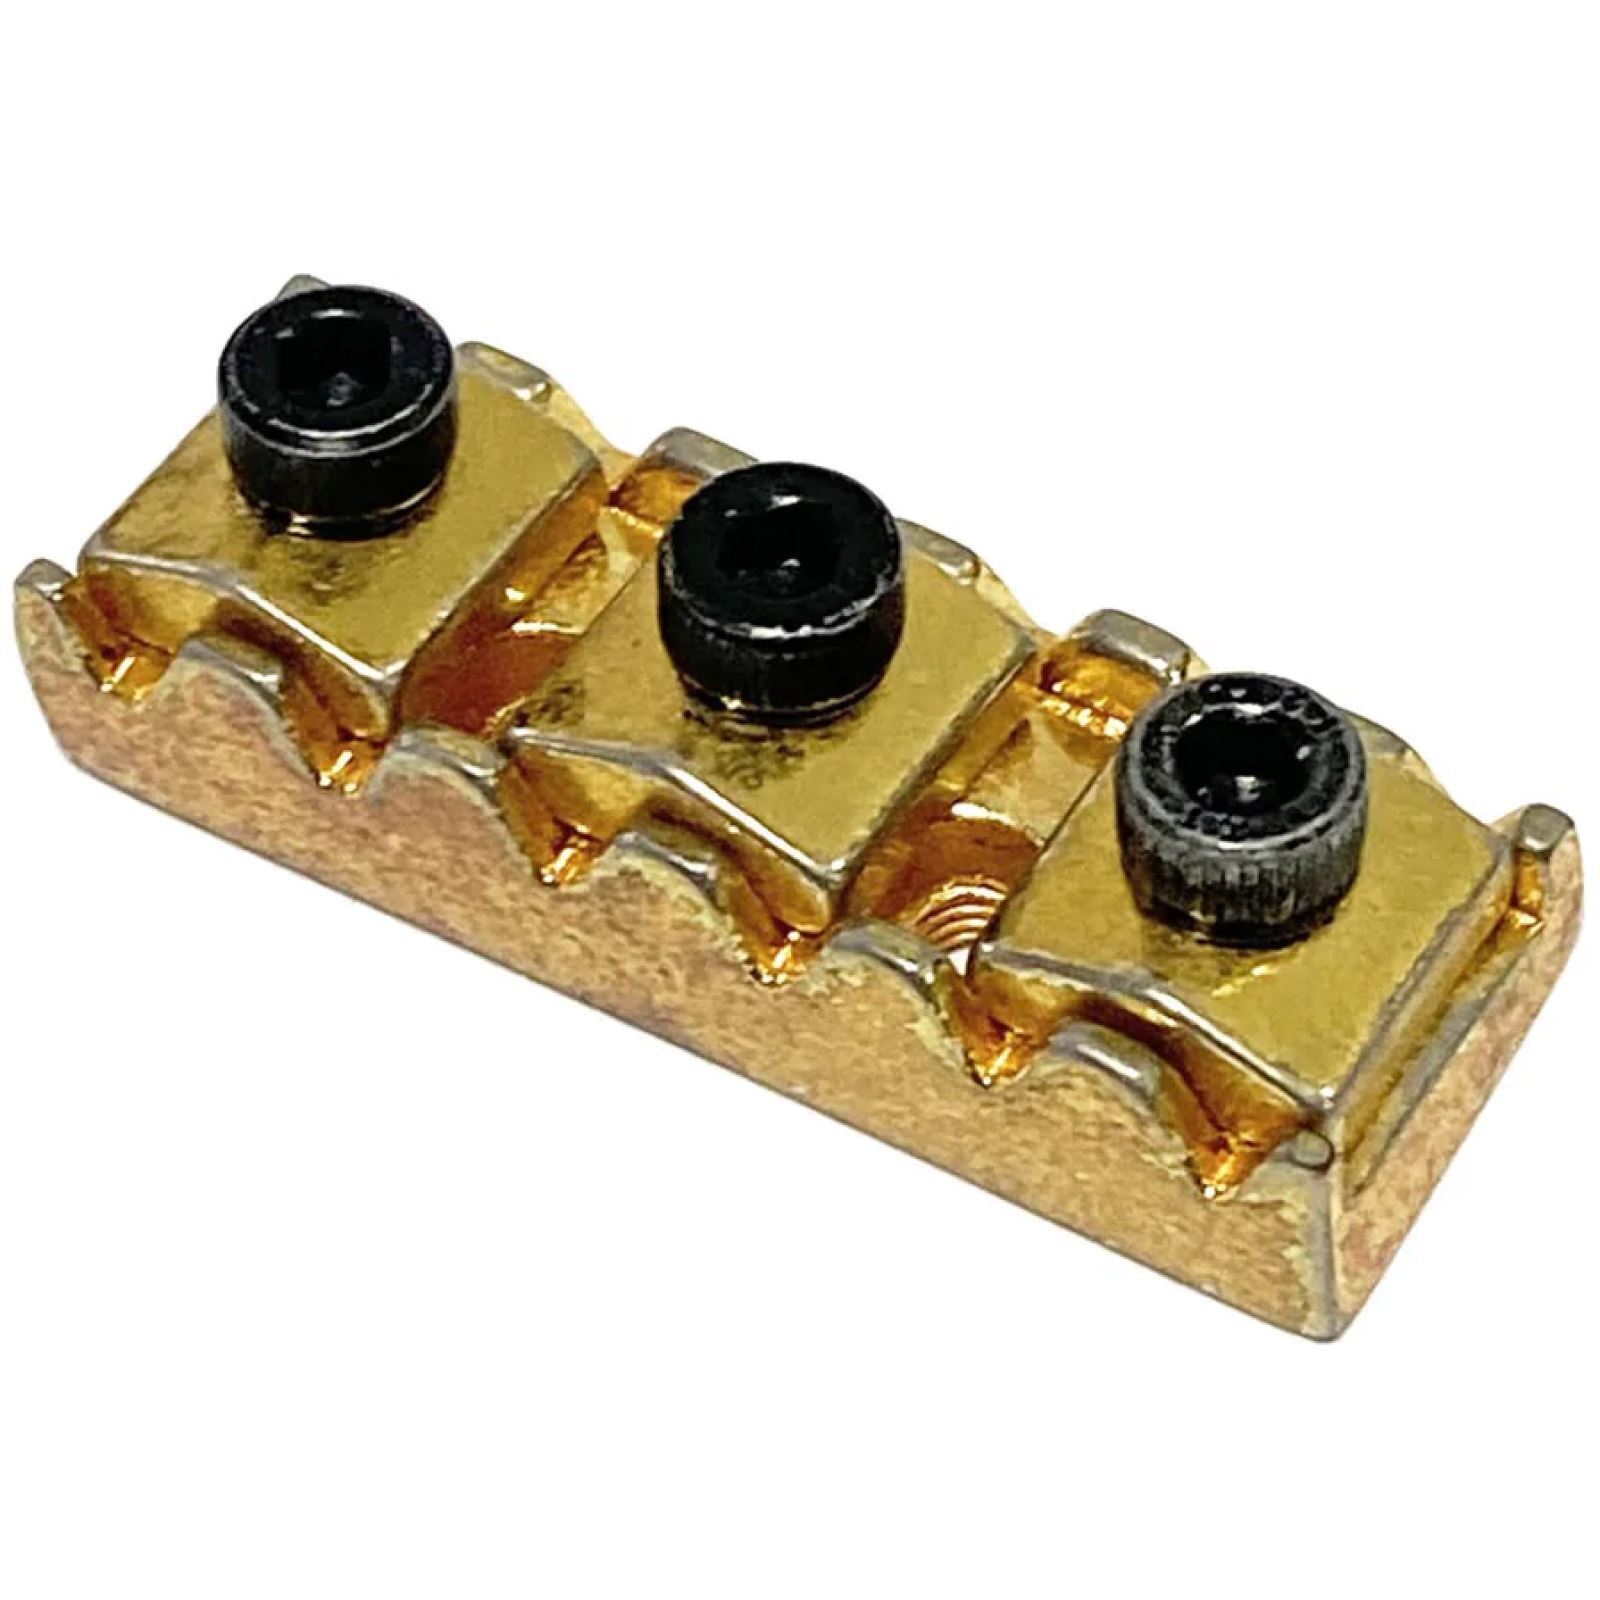 Floyd Rose Special Relic Tremolo System FRTS3000L gold  lLeft-Handed/L3Nut/サスティーンブロック37mm/フロイドローズスペシャル/レフトハンド/左利き用/全国一律送料無料！